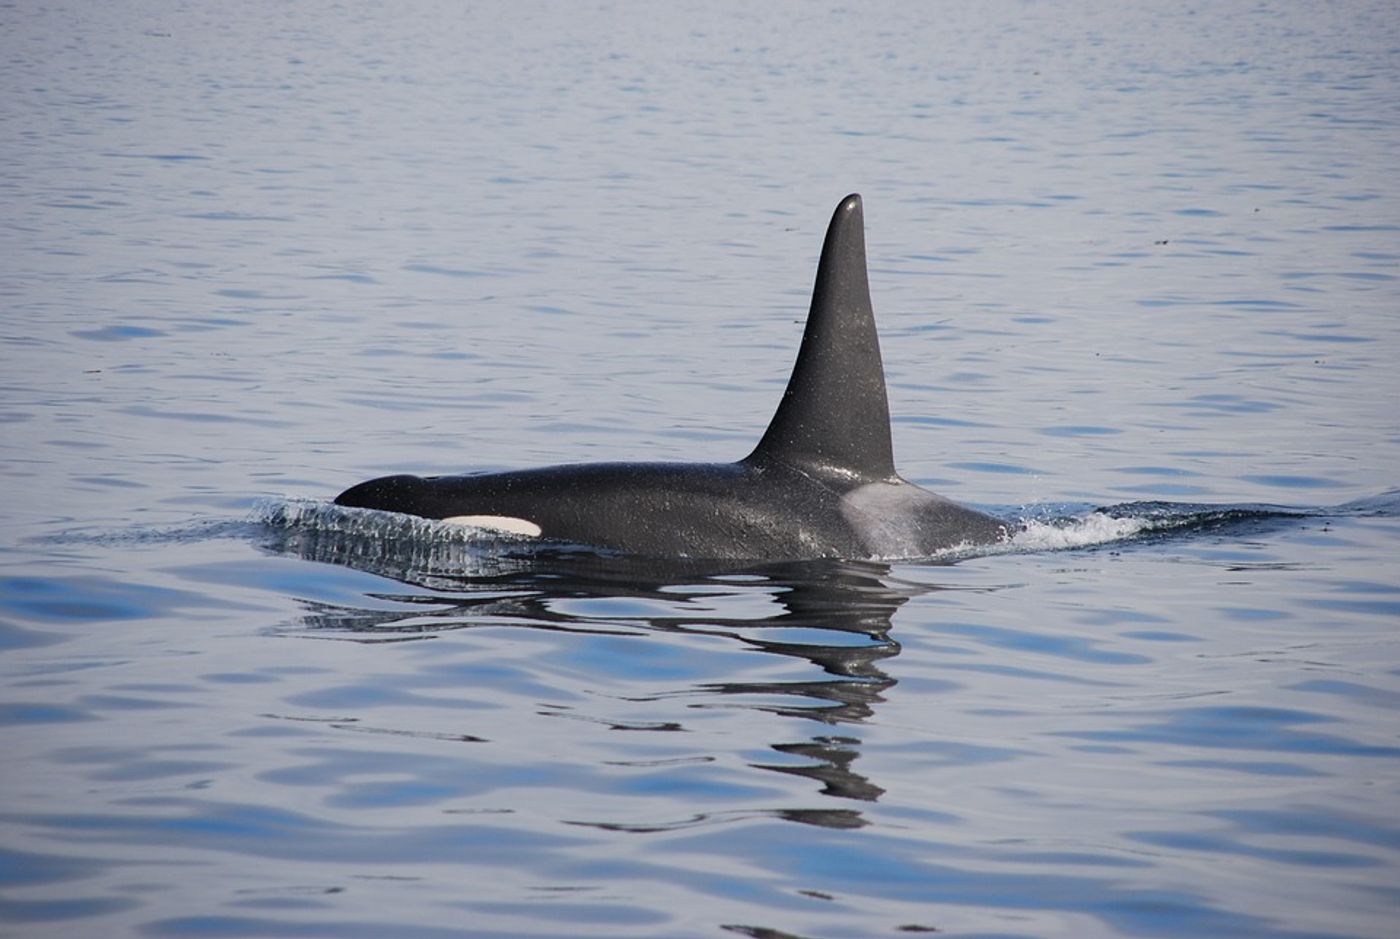 Researchers are learning more about how killer whales and other marine animals hunt.